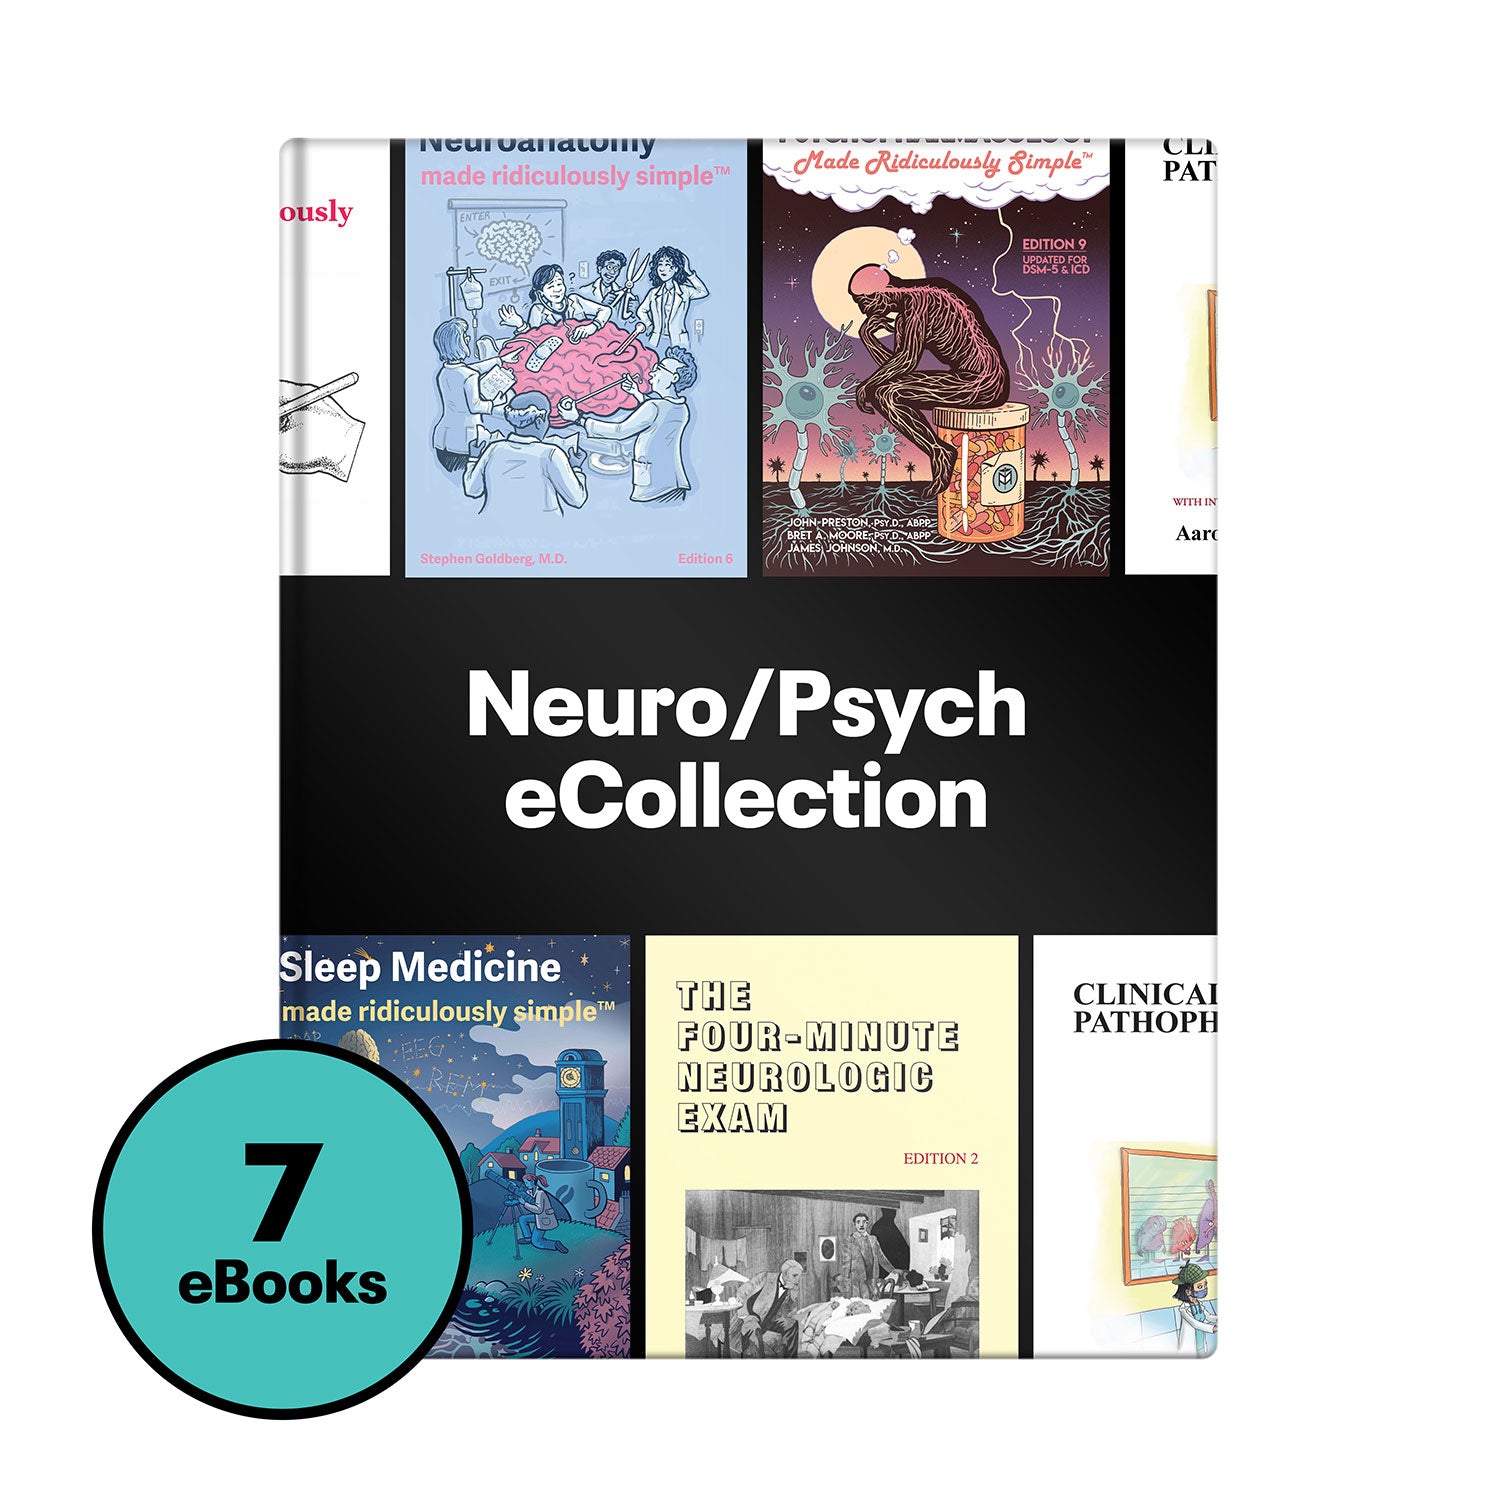 Neuro/Psych eCollection